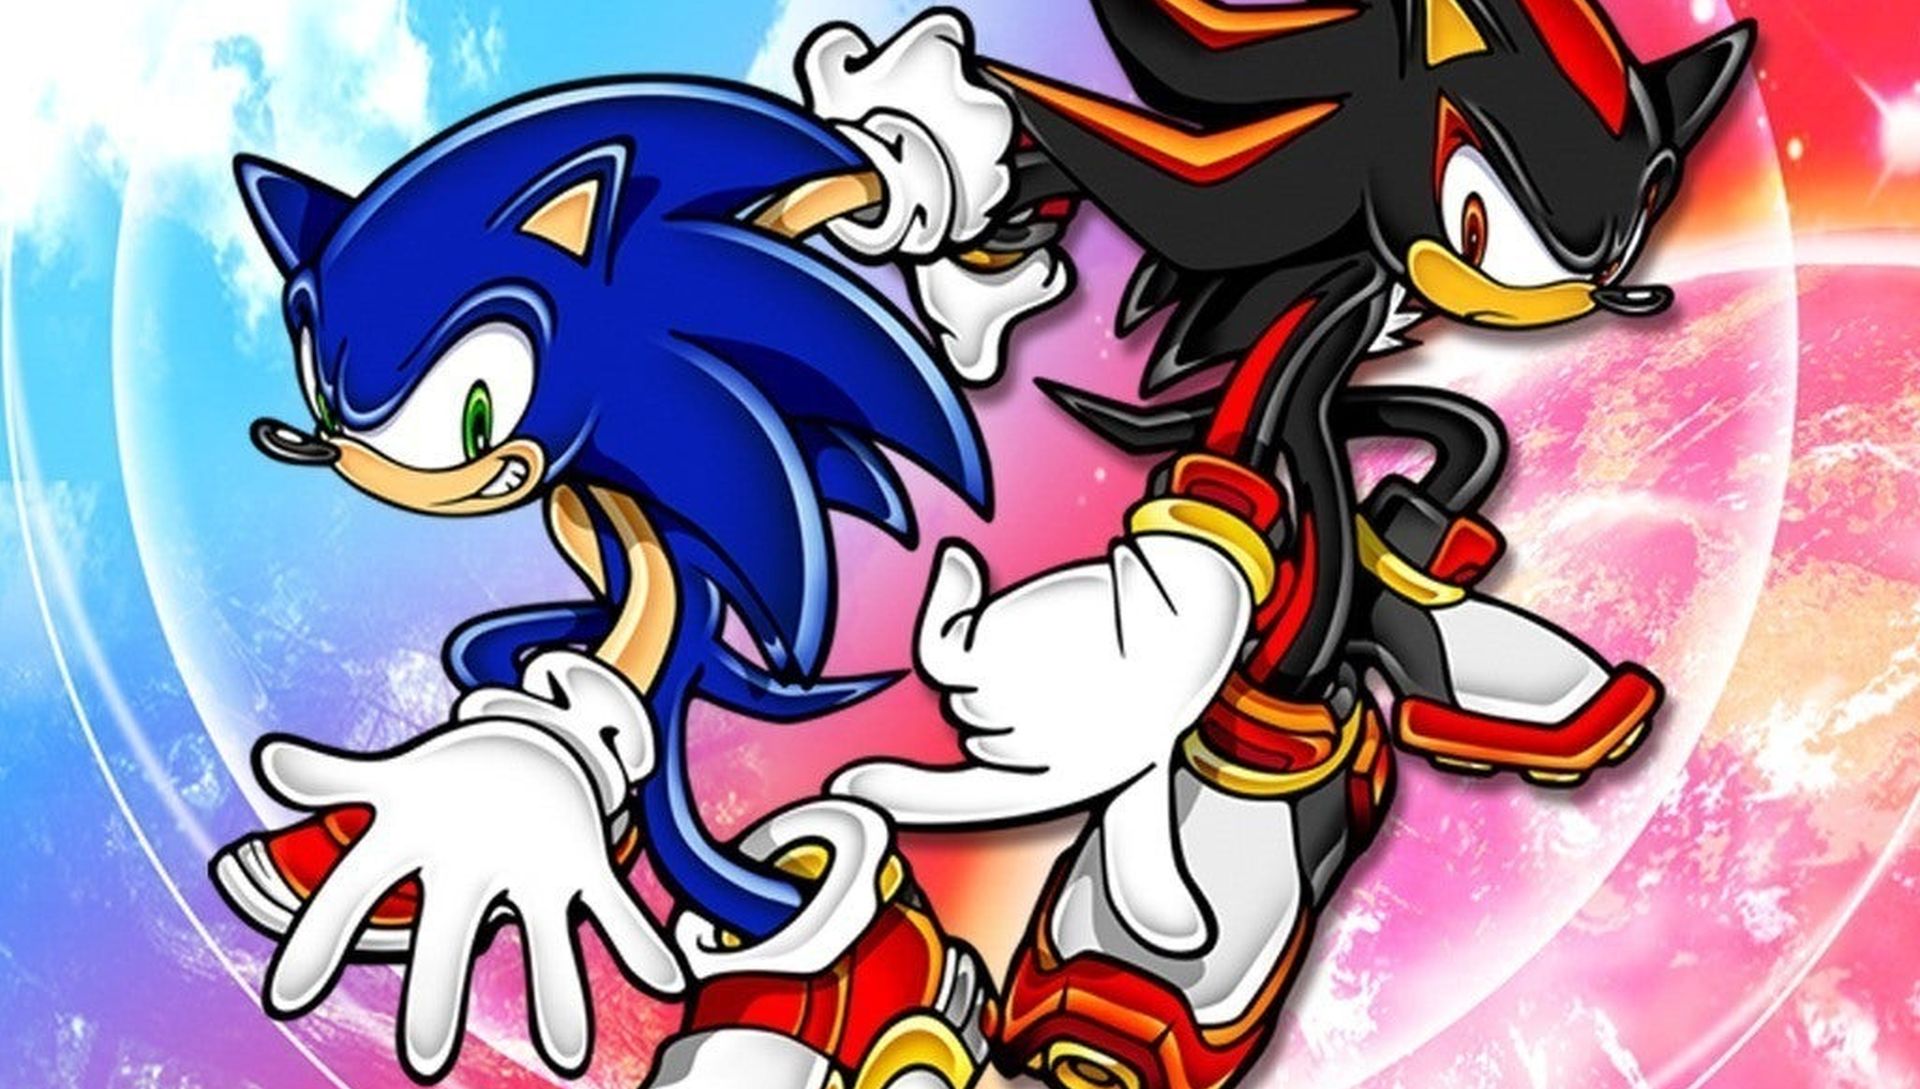 Sonic X Shadow Generations Could be Announced at State of Play – Rumor